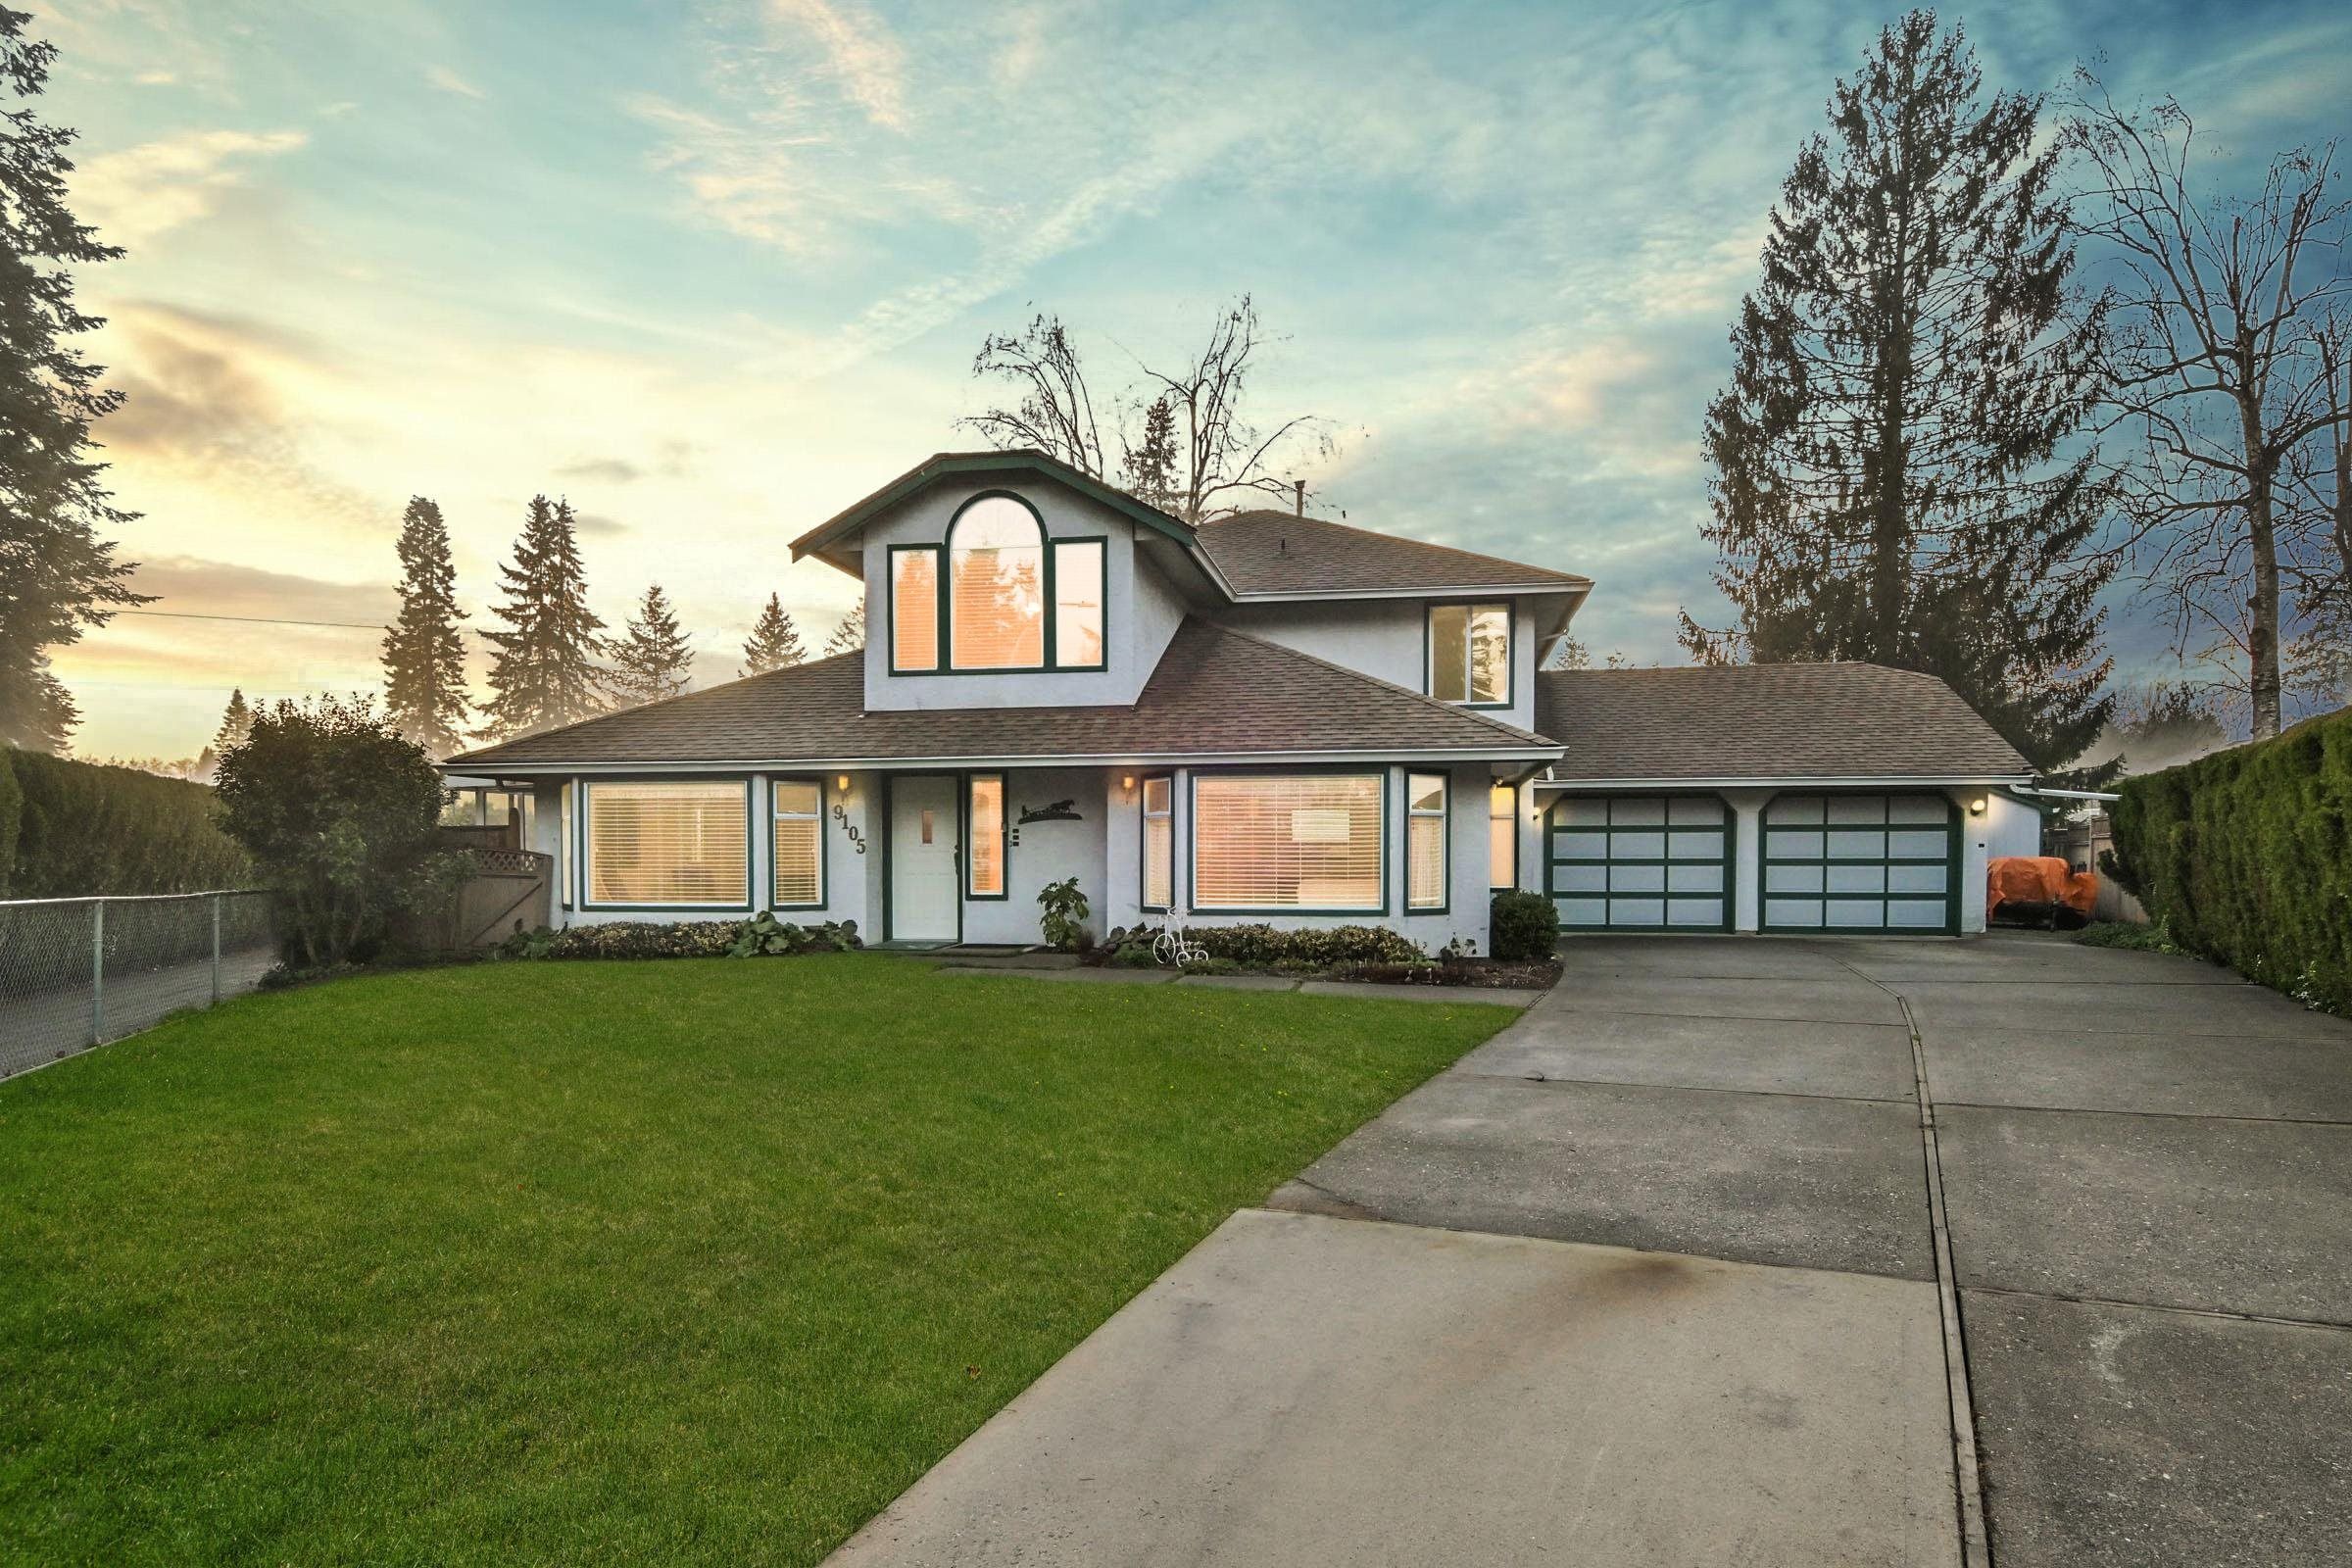 New property listed in Fort Langley, Langley